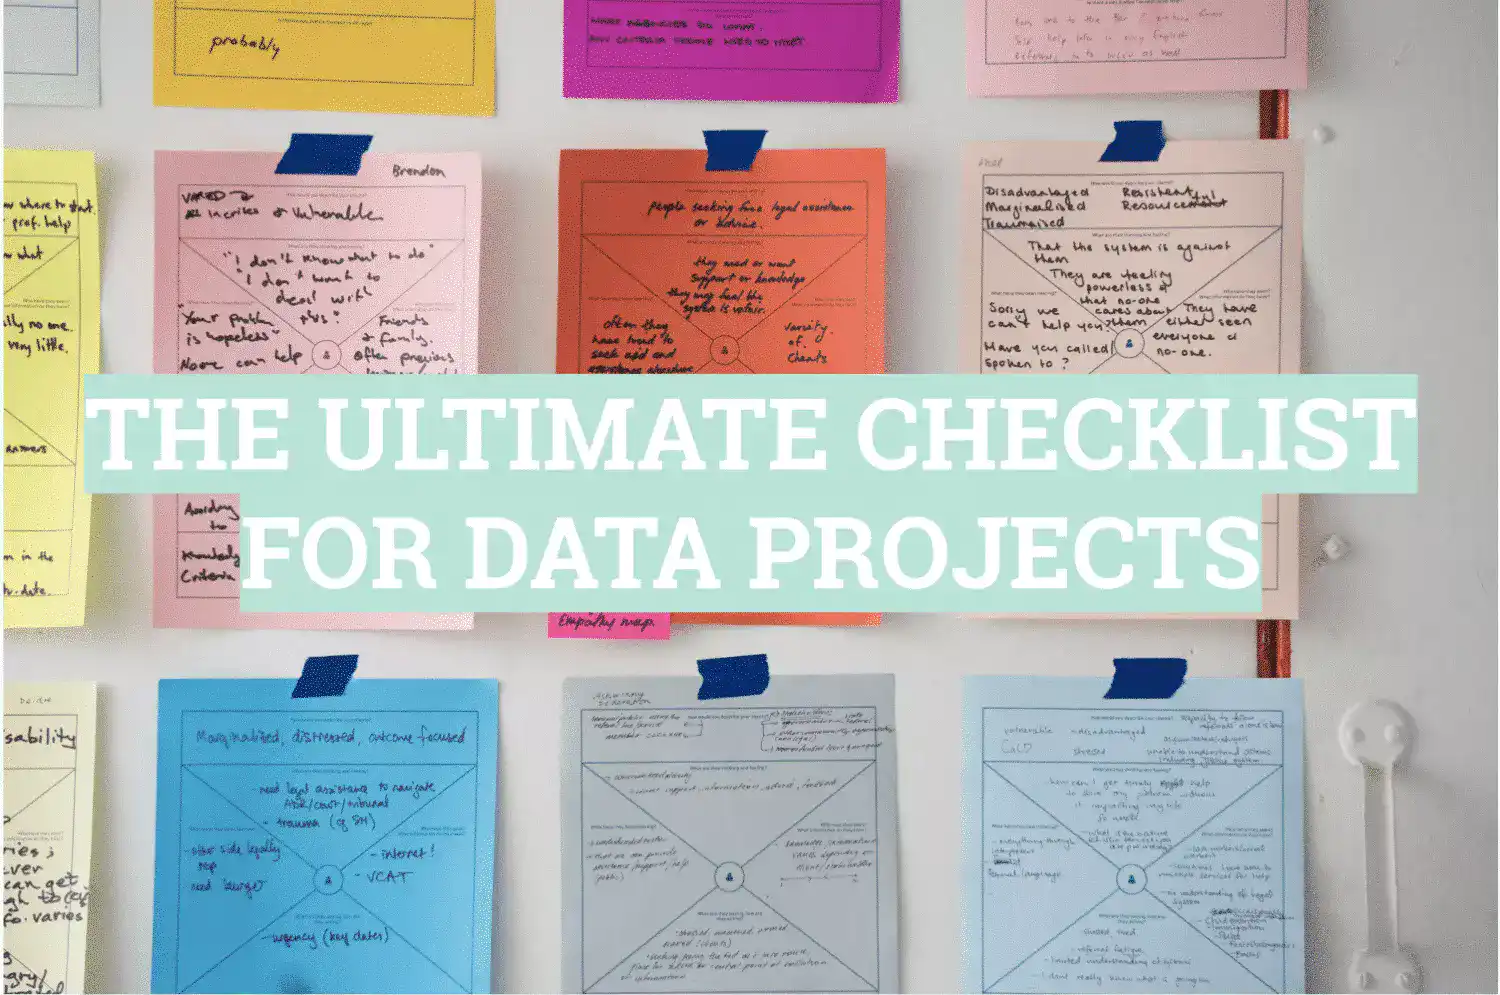 The ultimate checklist for data project - Data project efficiently